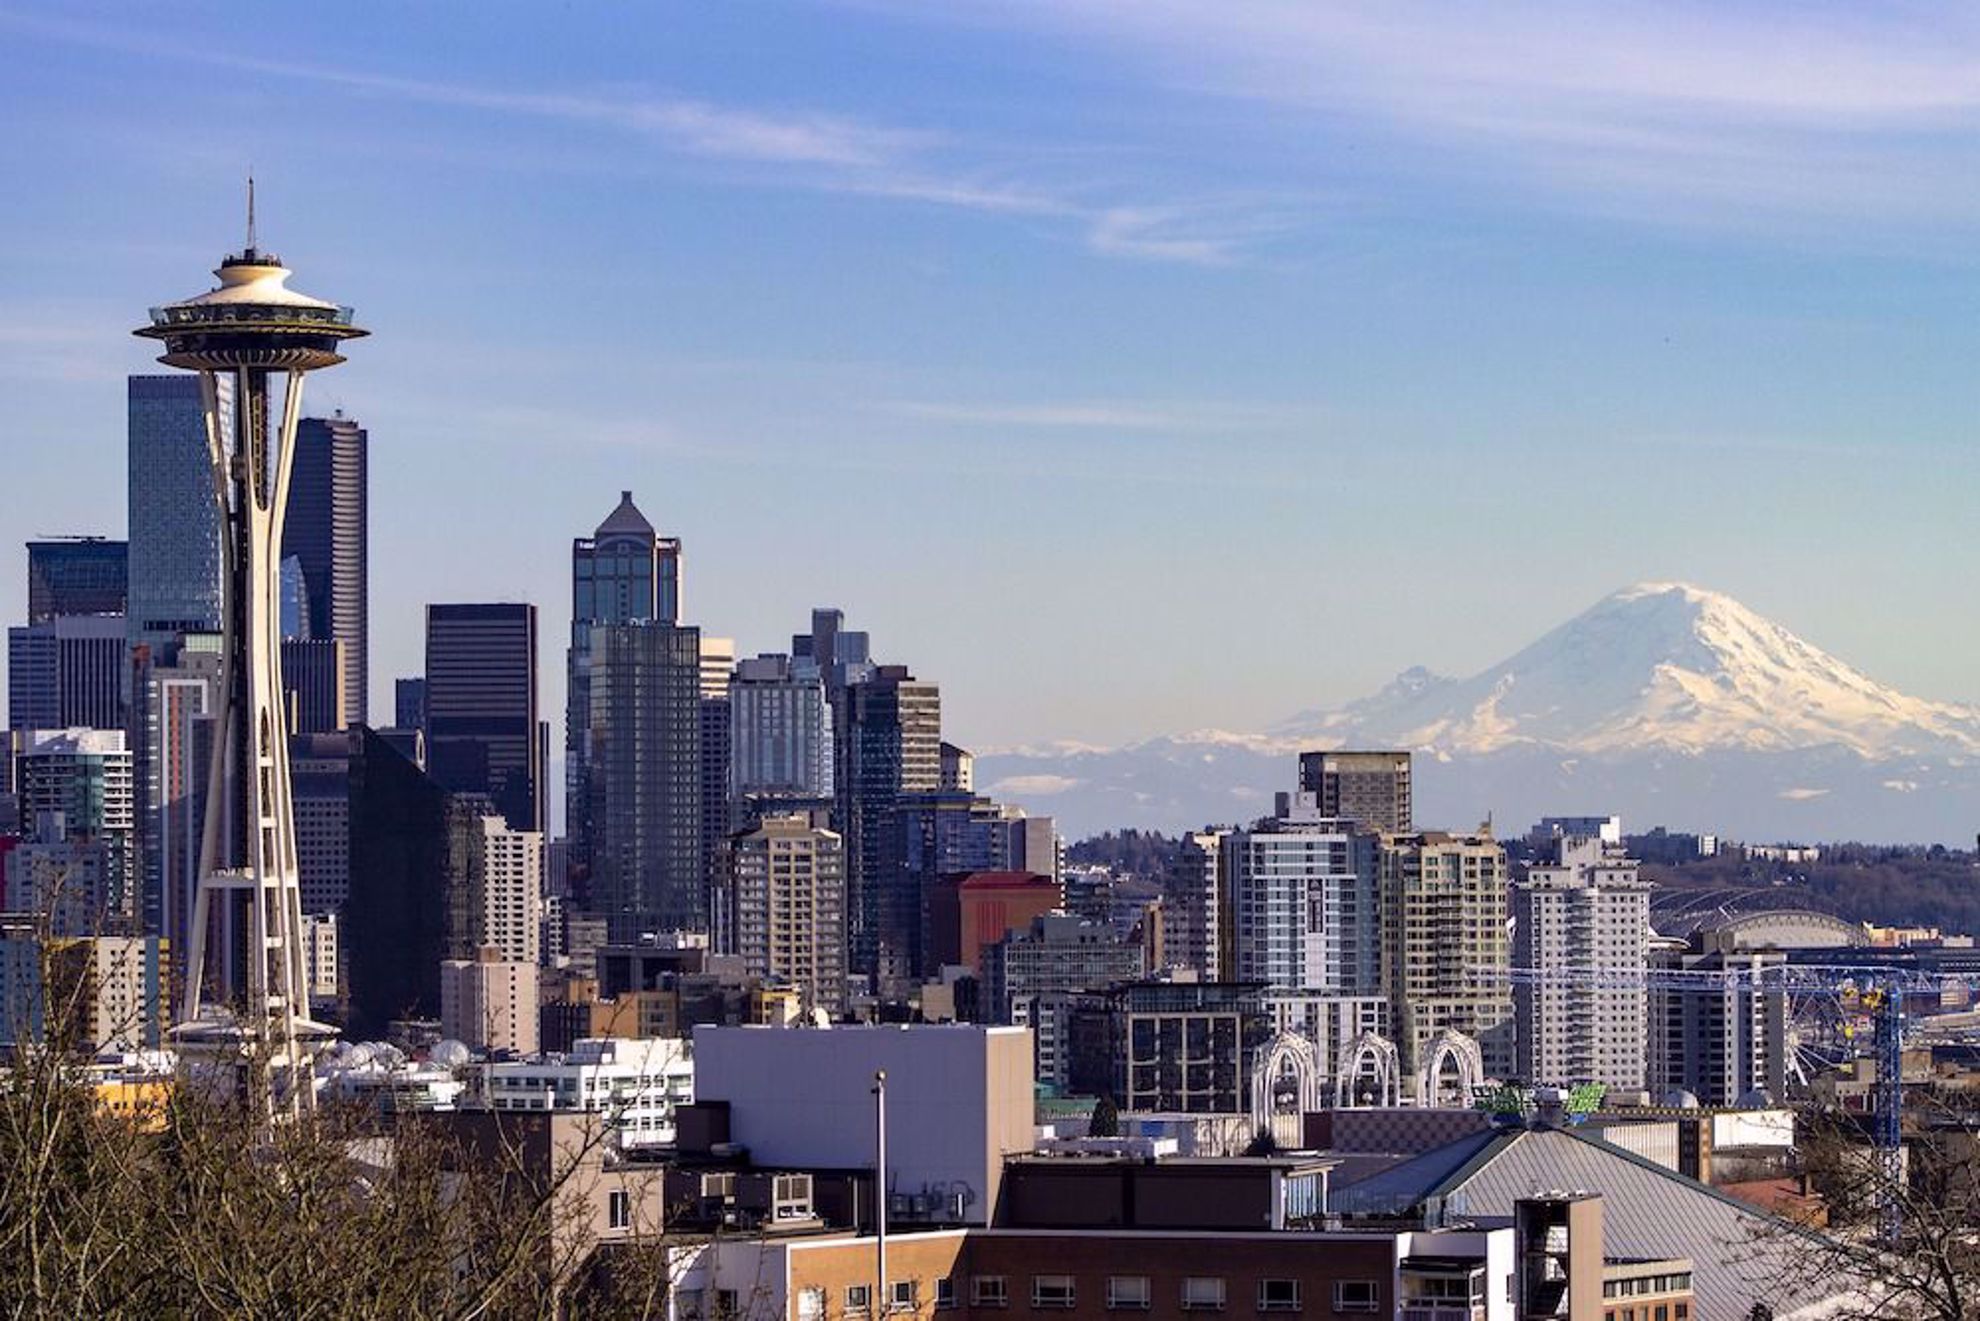 Seattle skyline with Space Needle and Mt. Rainier